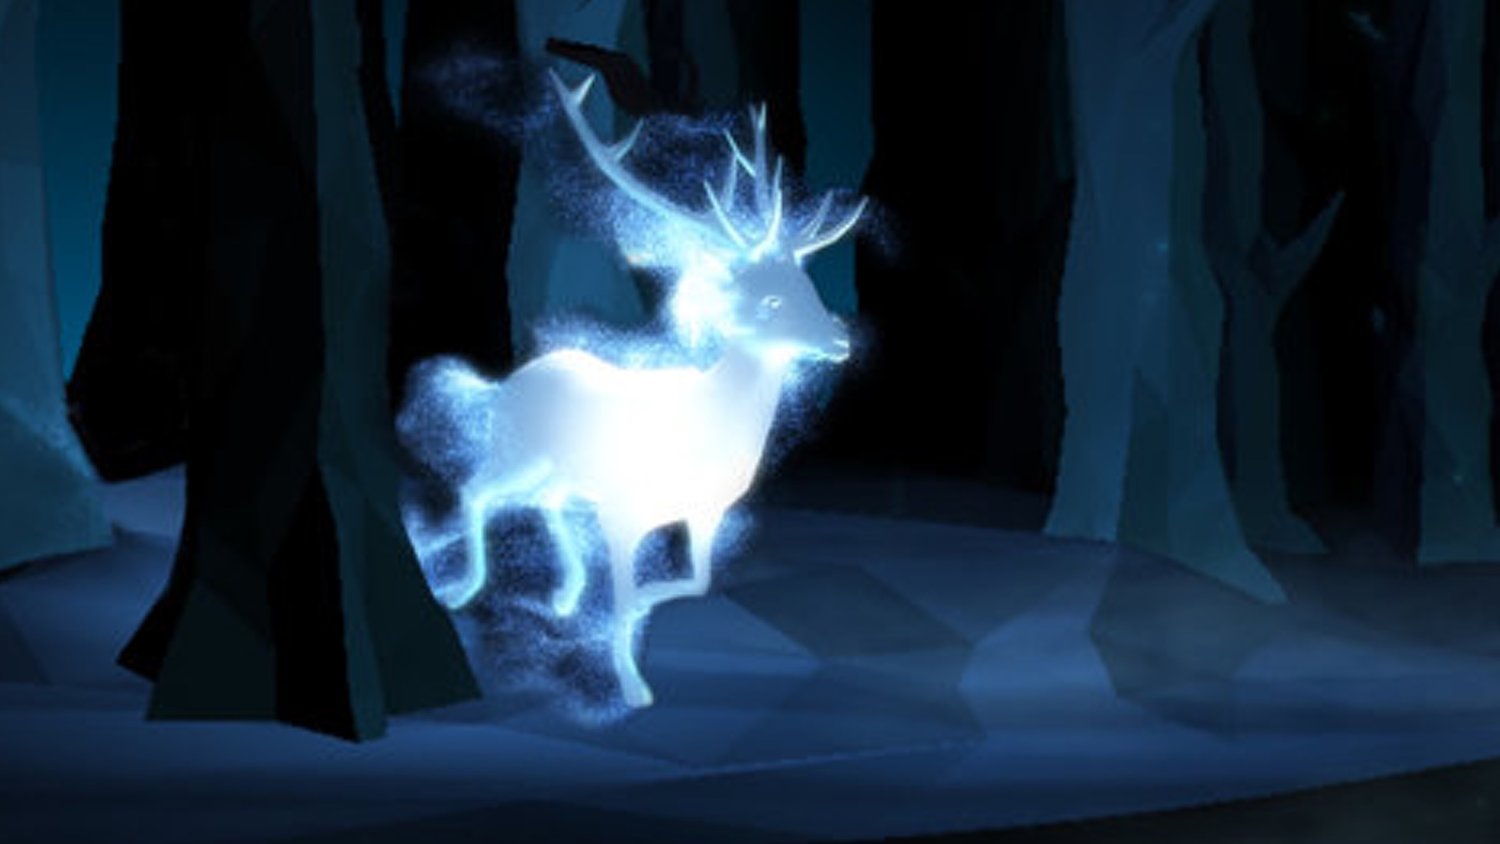 Find Out What Your Patronus is with The Official Pottermore